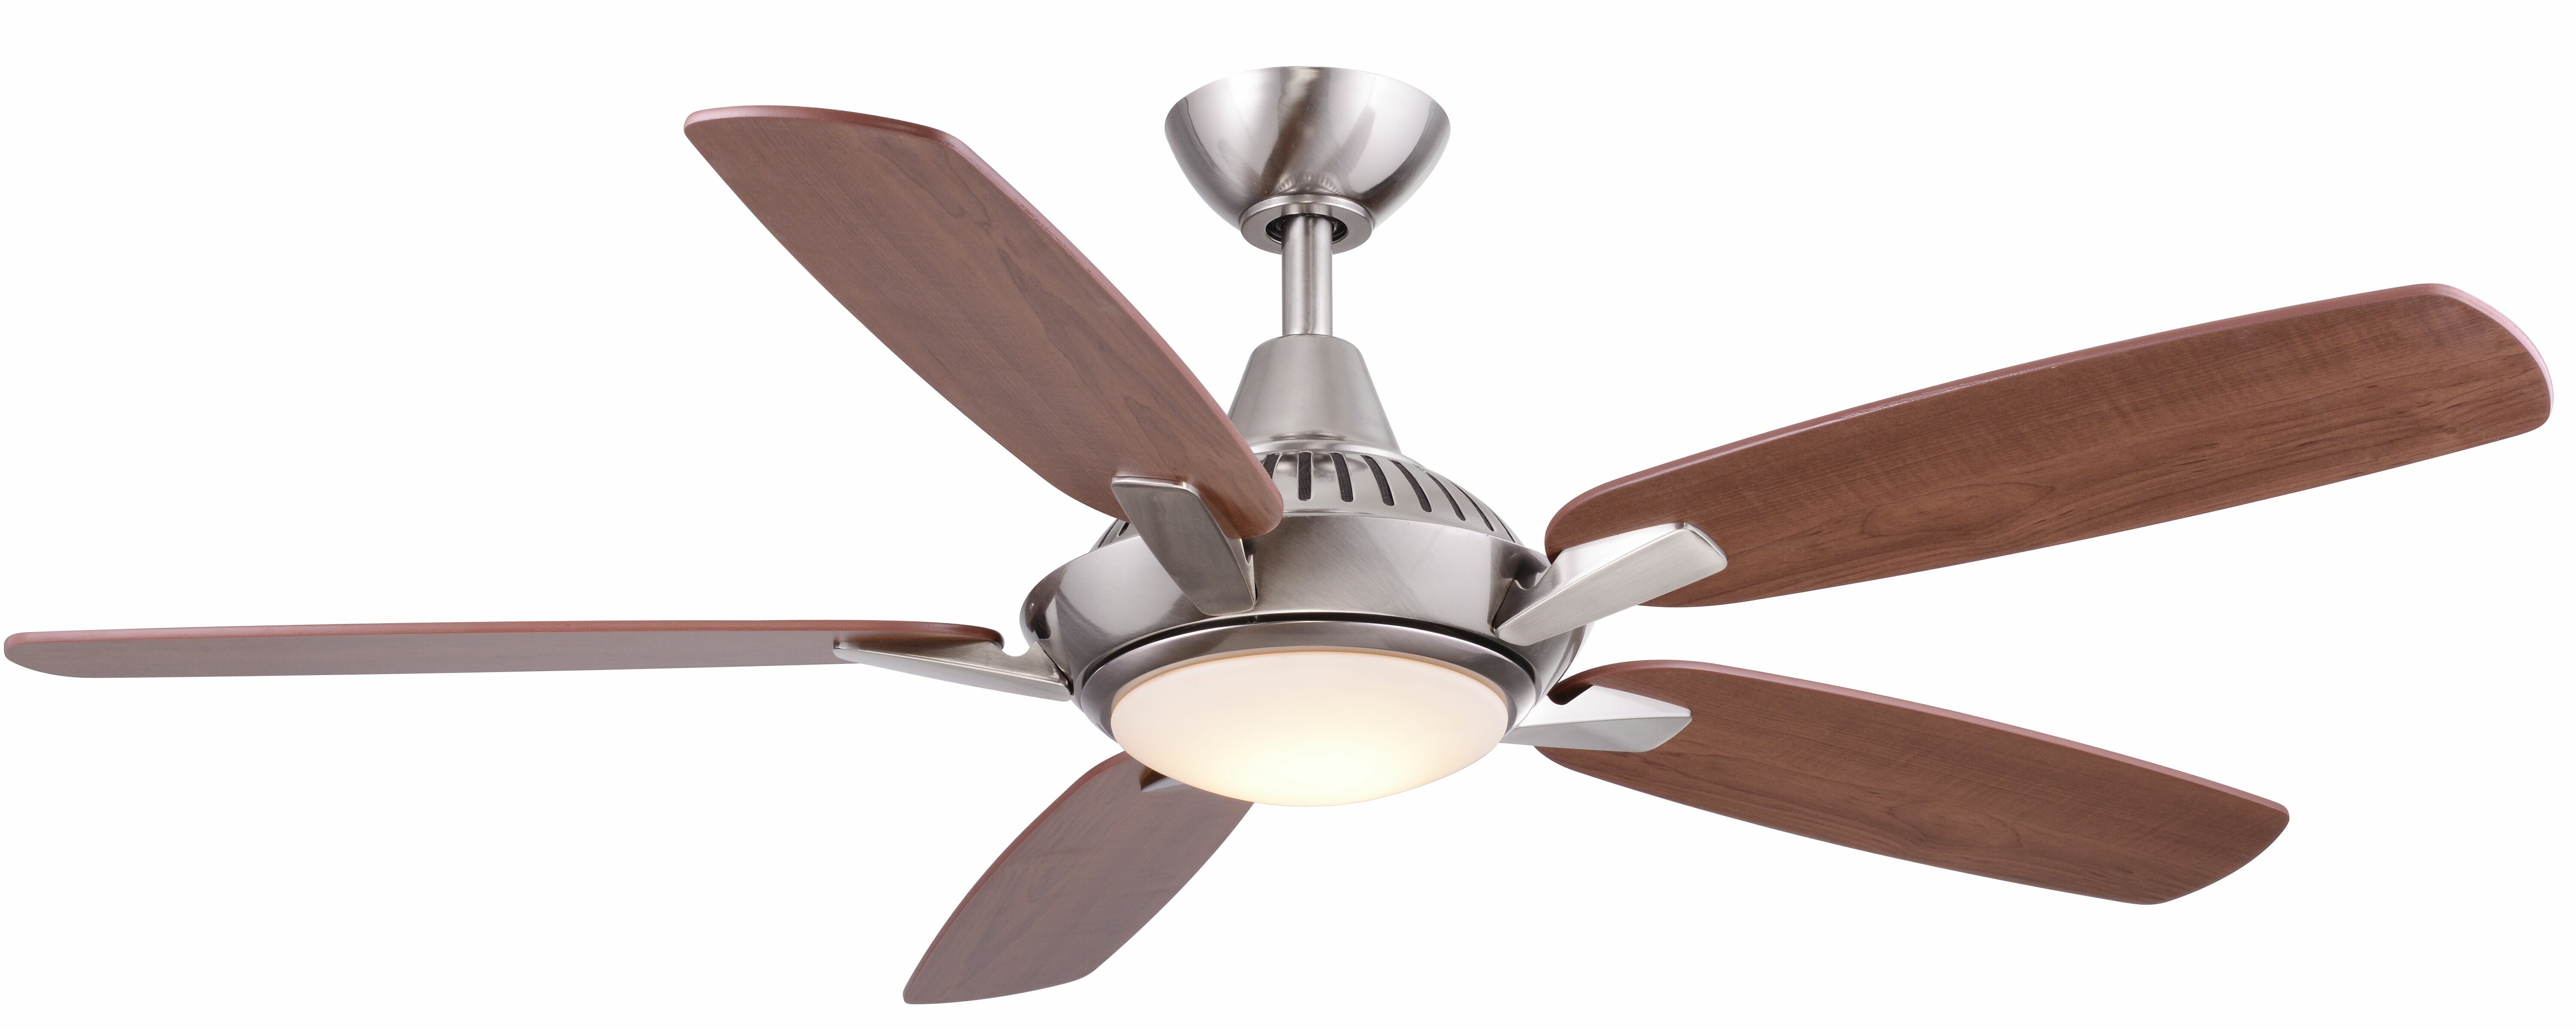 Andover Mills 52 Poarch 5 Blade Led Standard Ceiling Fan With Remote Control And Light Kit Included Reviews Wayfair